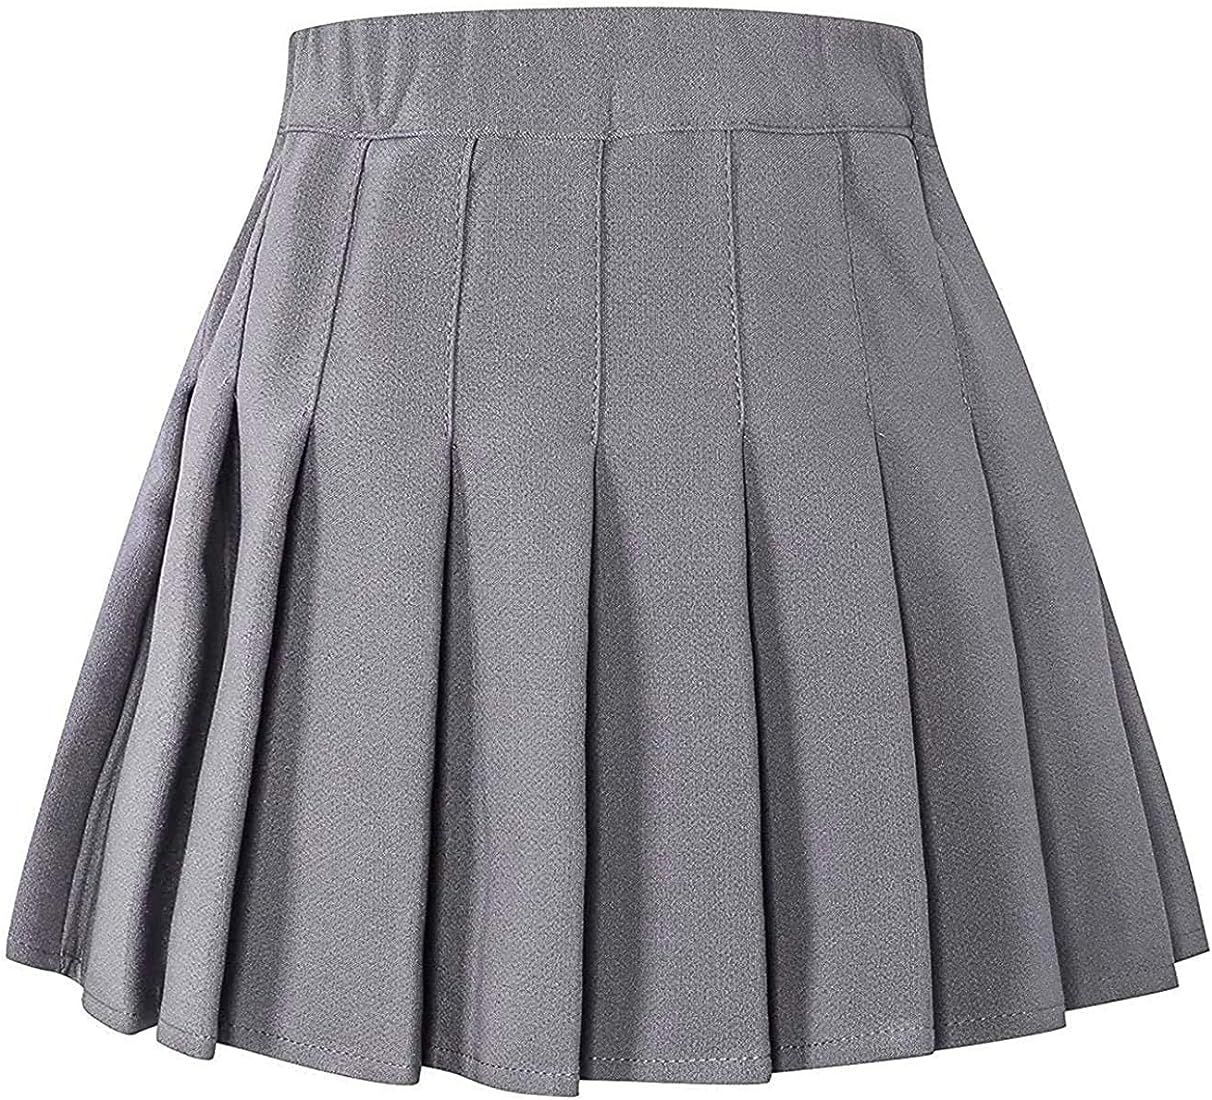 SANGTREE Girls Women's Pleated Skirt with Comfy Stretchy Band, 2 Years - US 4XL | Amazon (US)